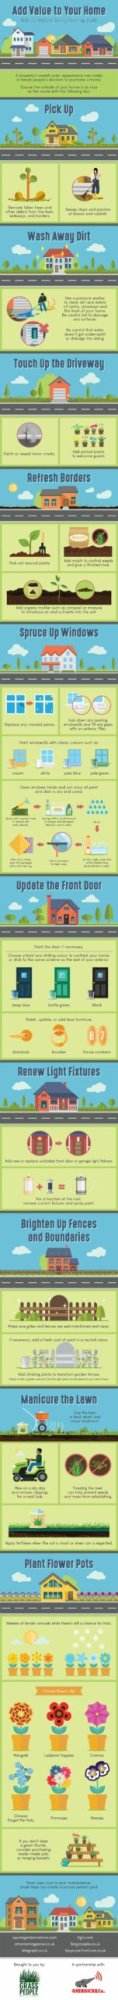 Spring Outdoor Clean-Up Guide Infographic selling your home